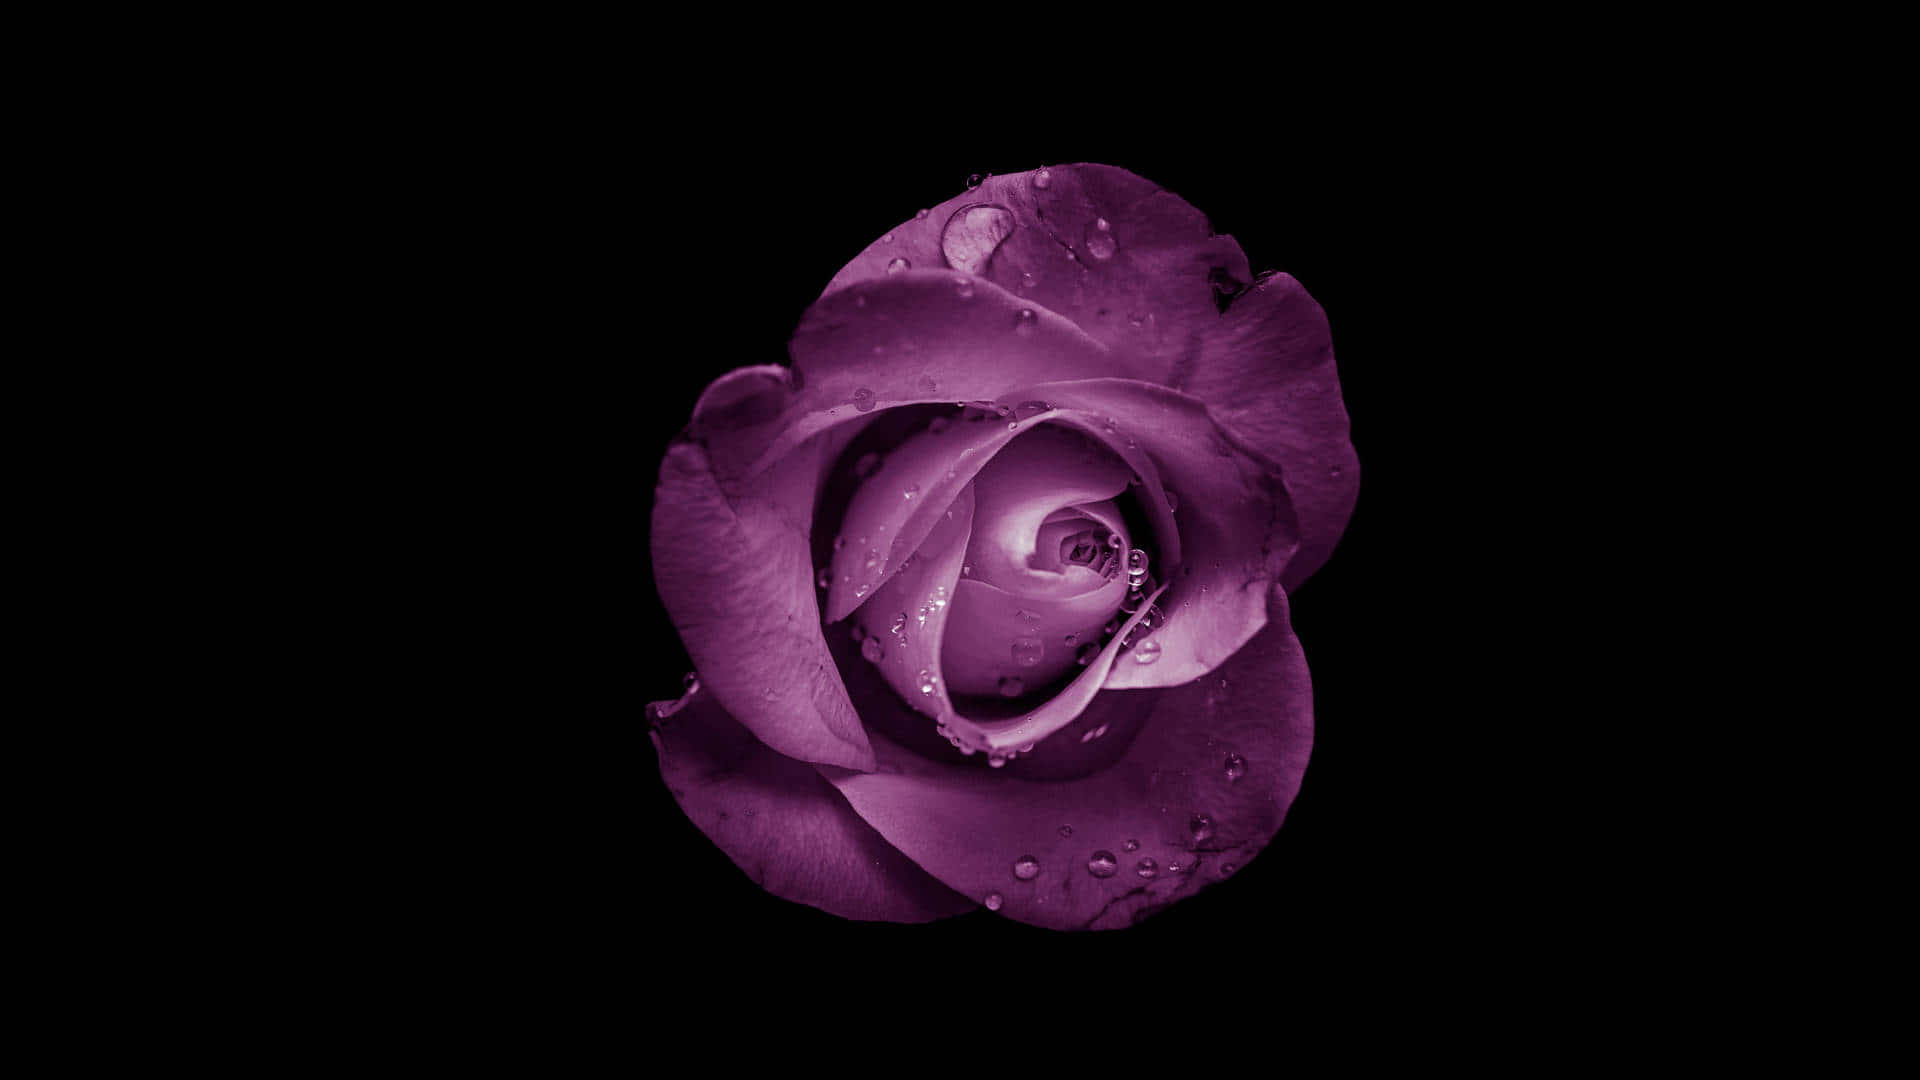 Purple Aesthetic Rose On Black Background Picture